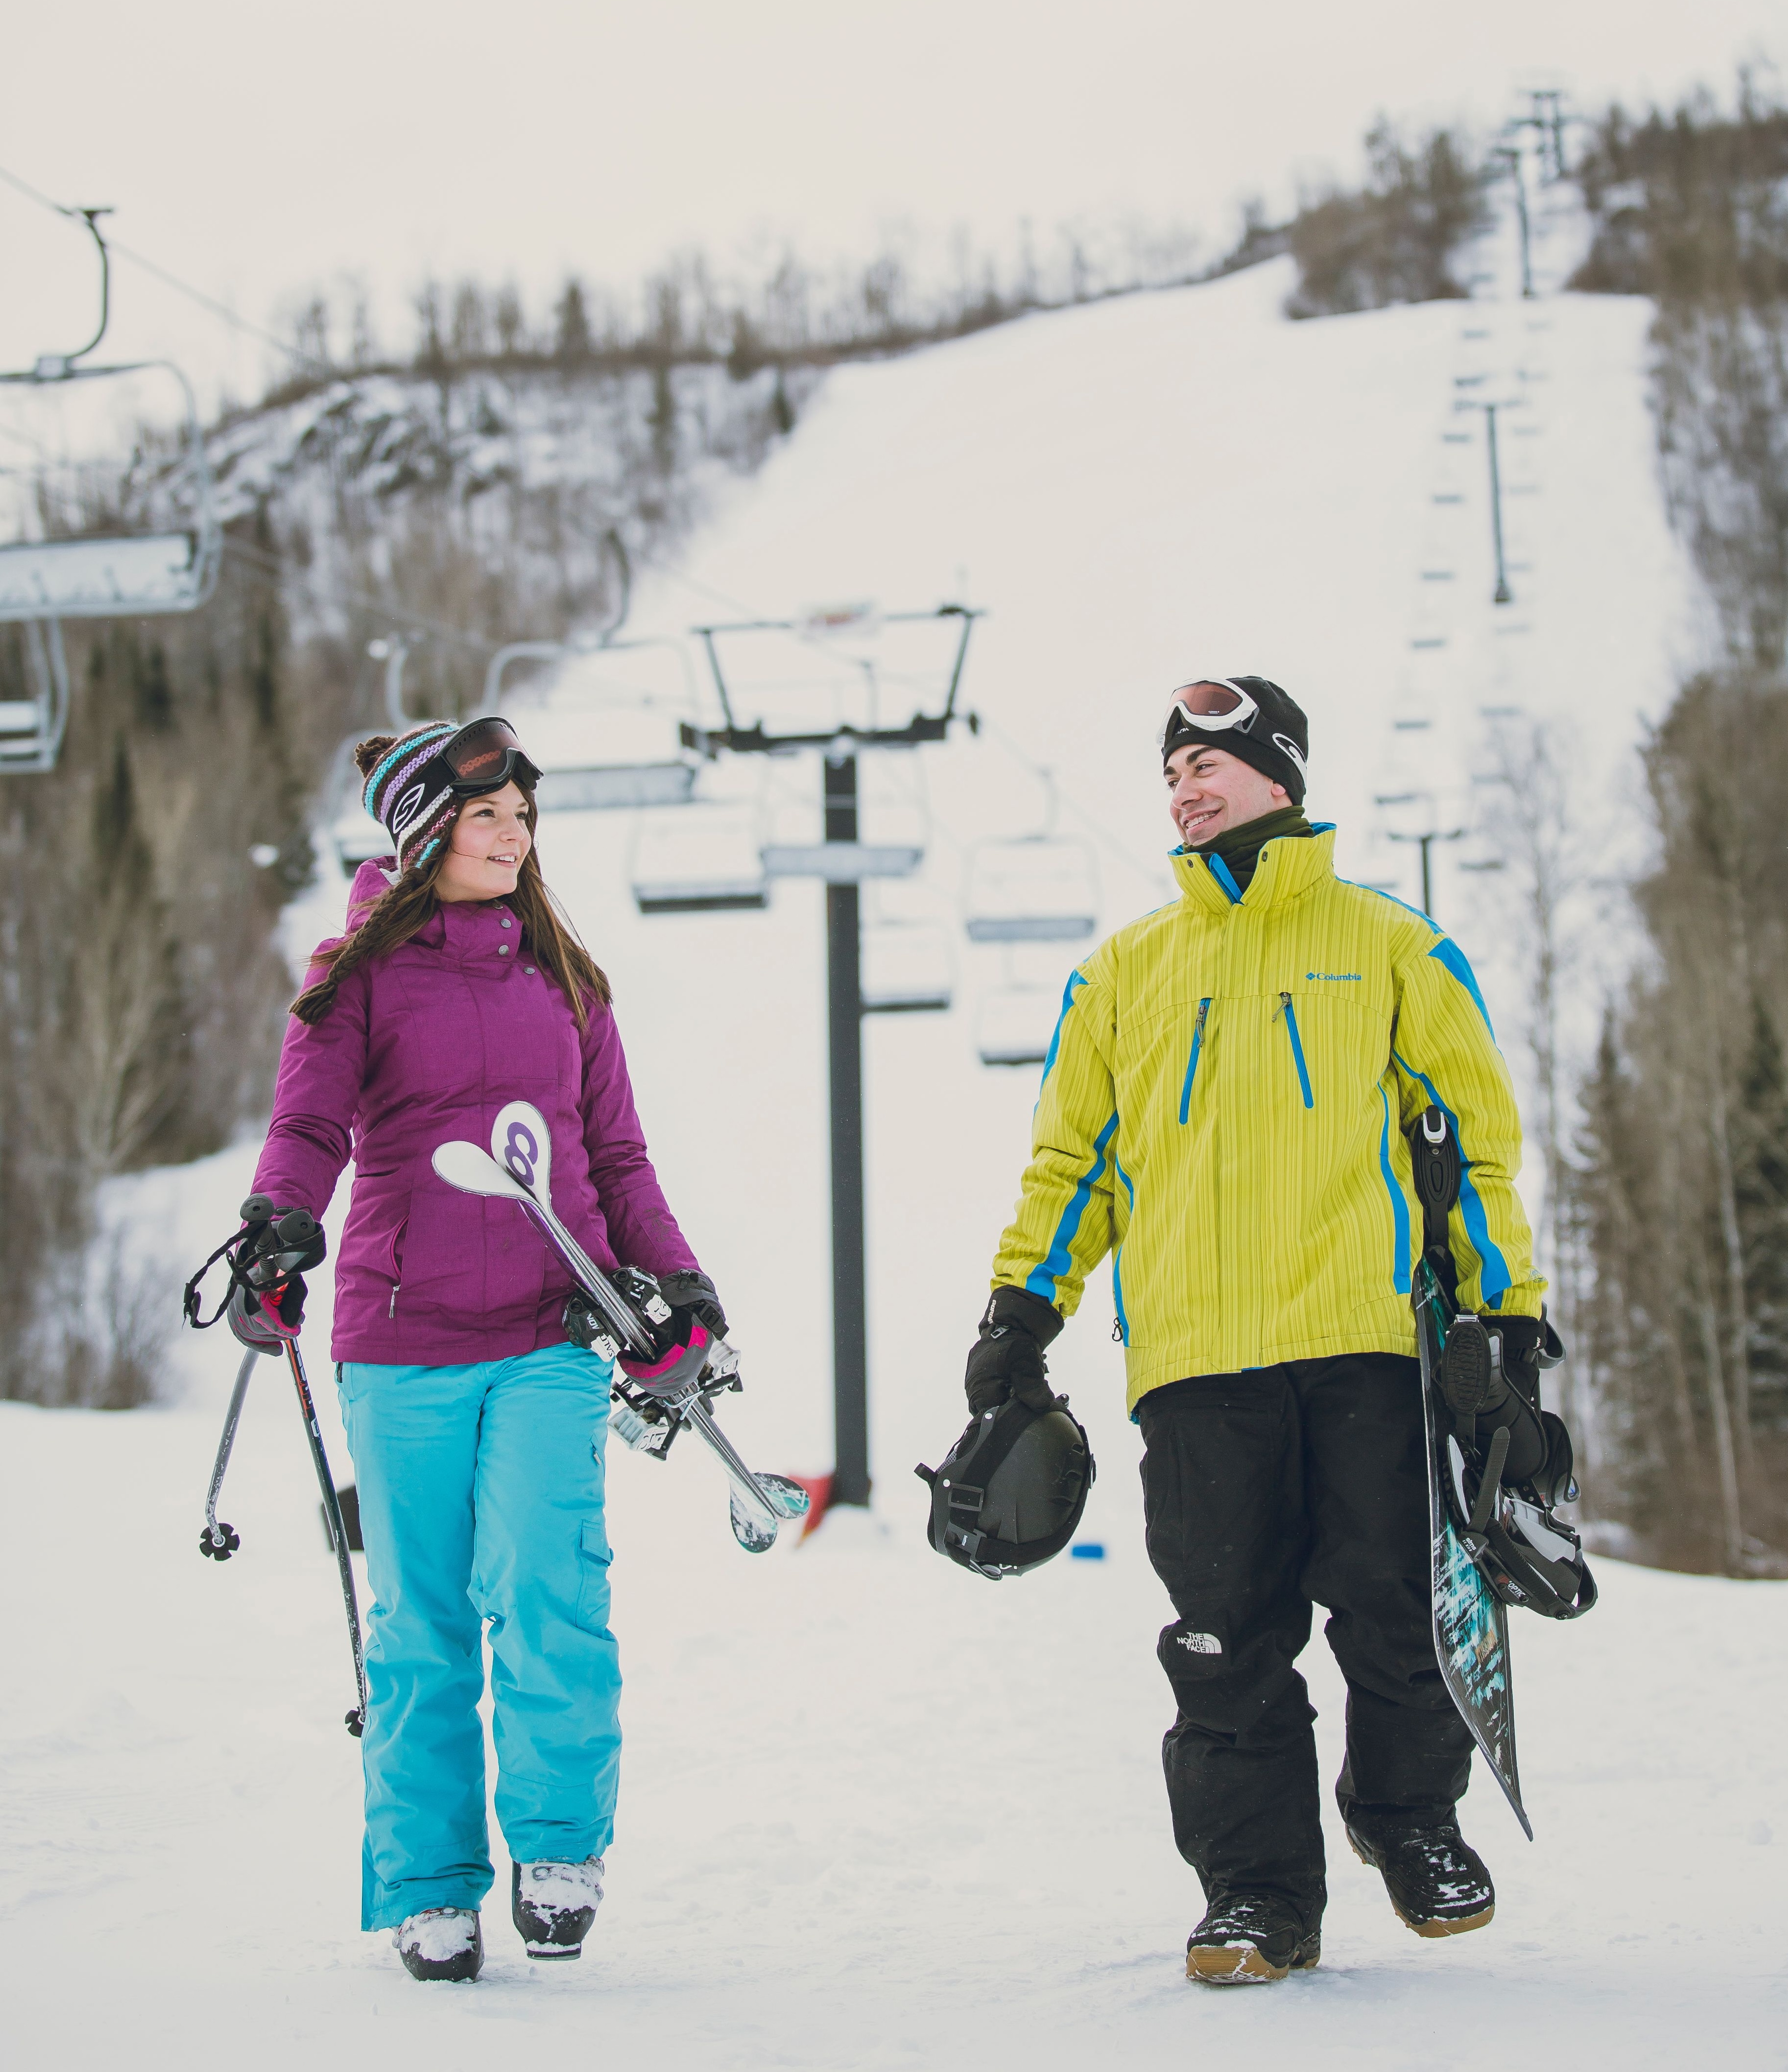 A skier and snowboarder talking and smiling as they walk under a ski lift at the bottom of a ski hill.